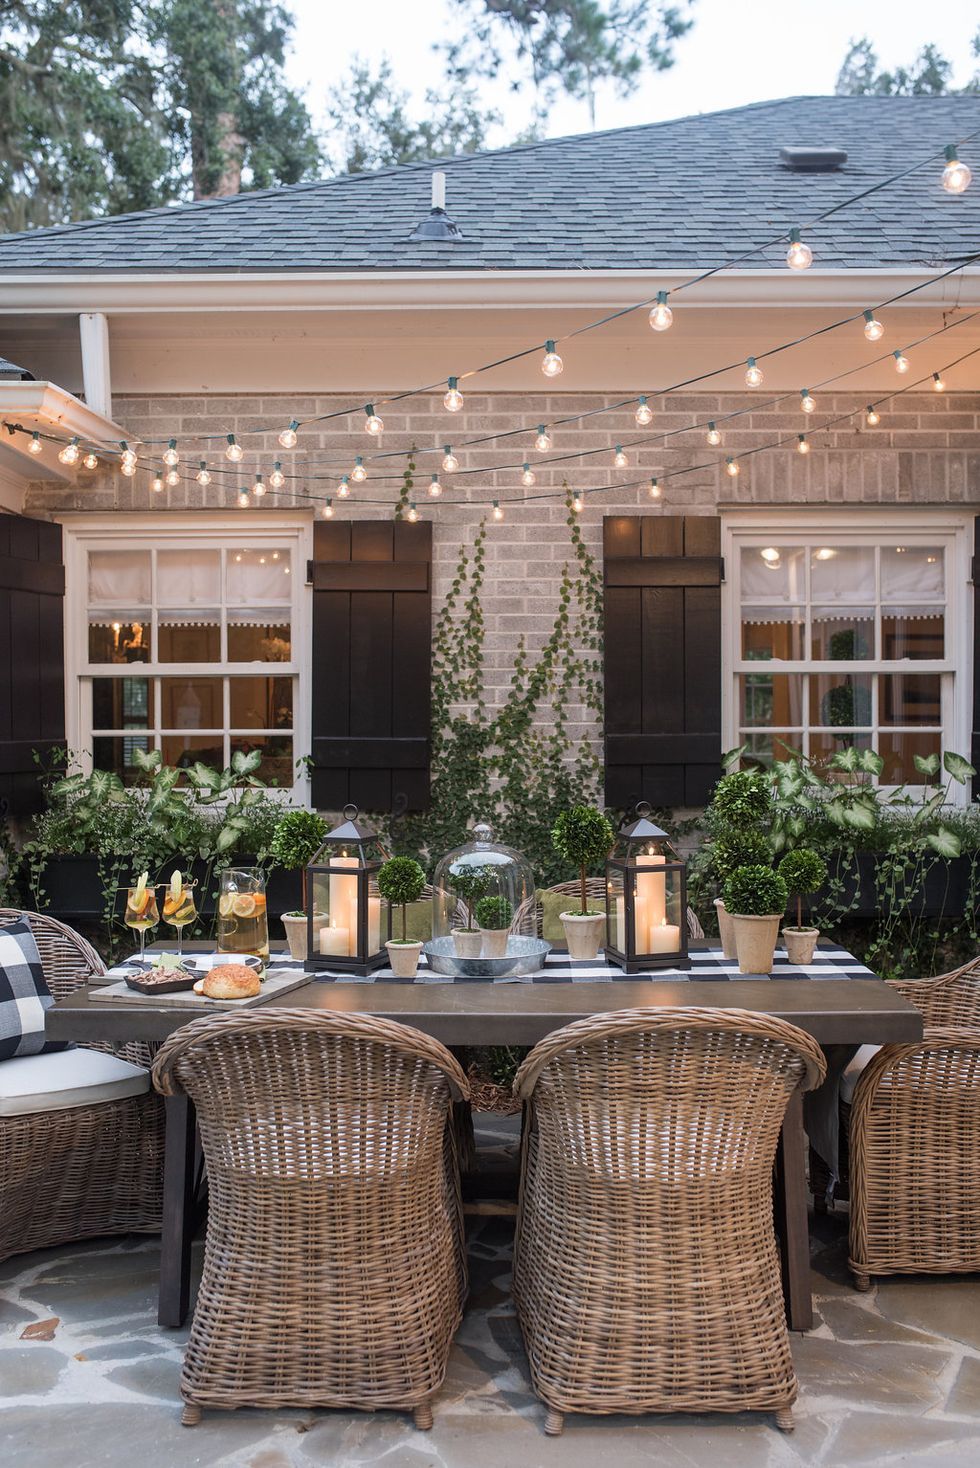 Illuminate Your Outdoor Space with Festive Patio Lights